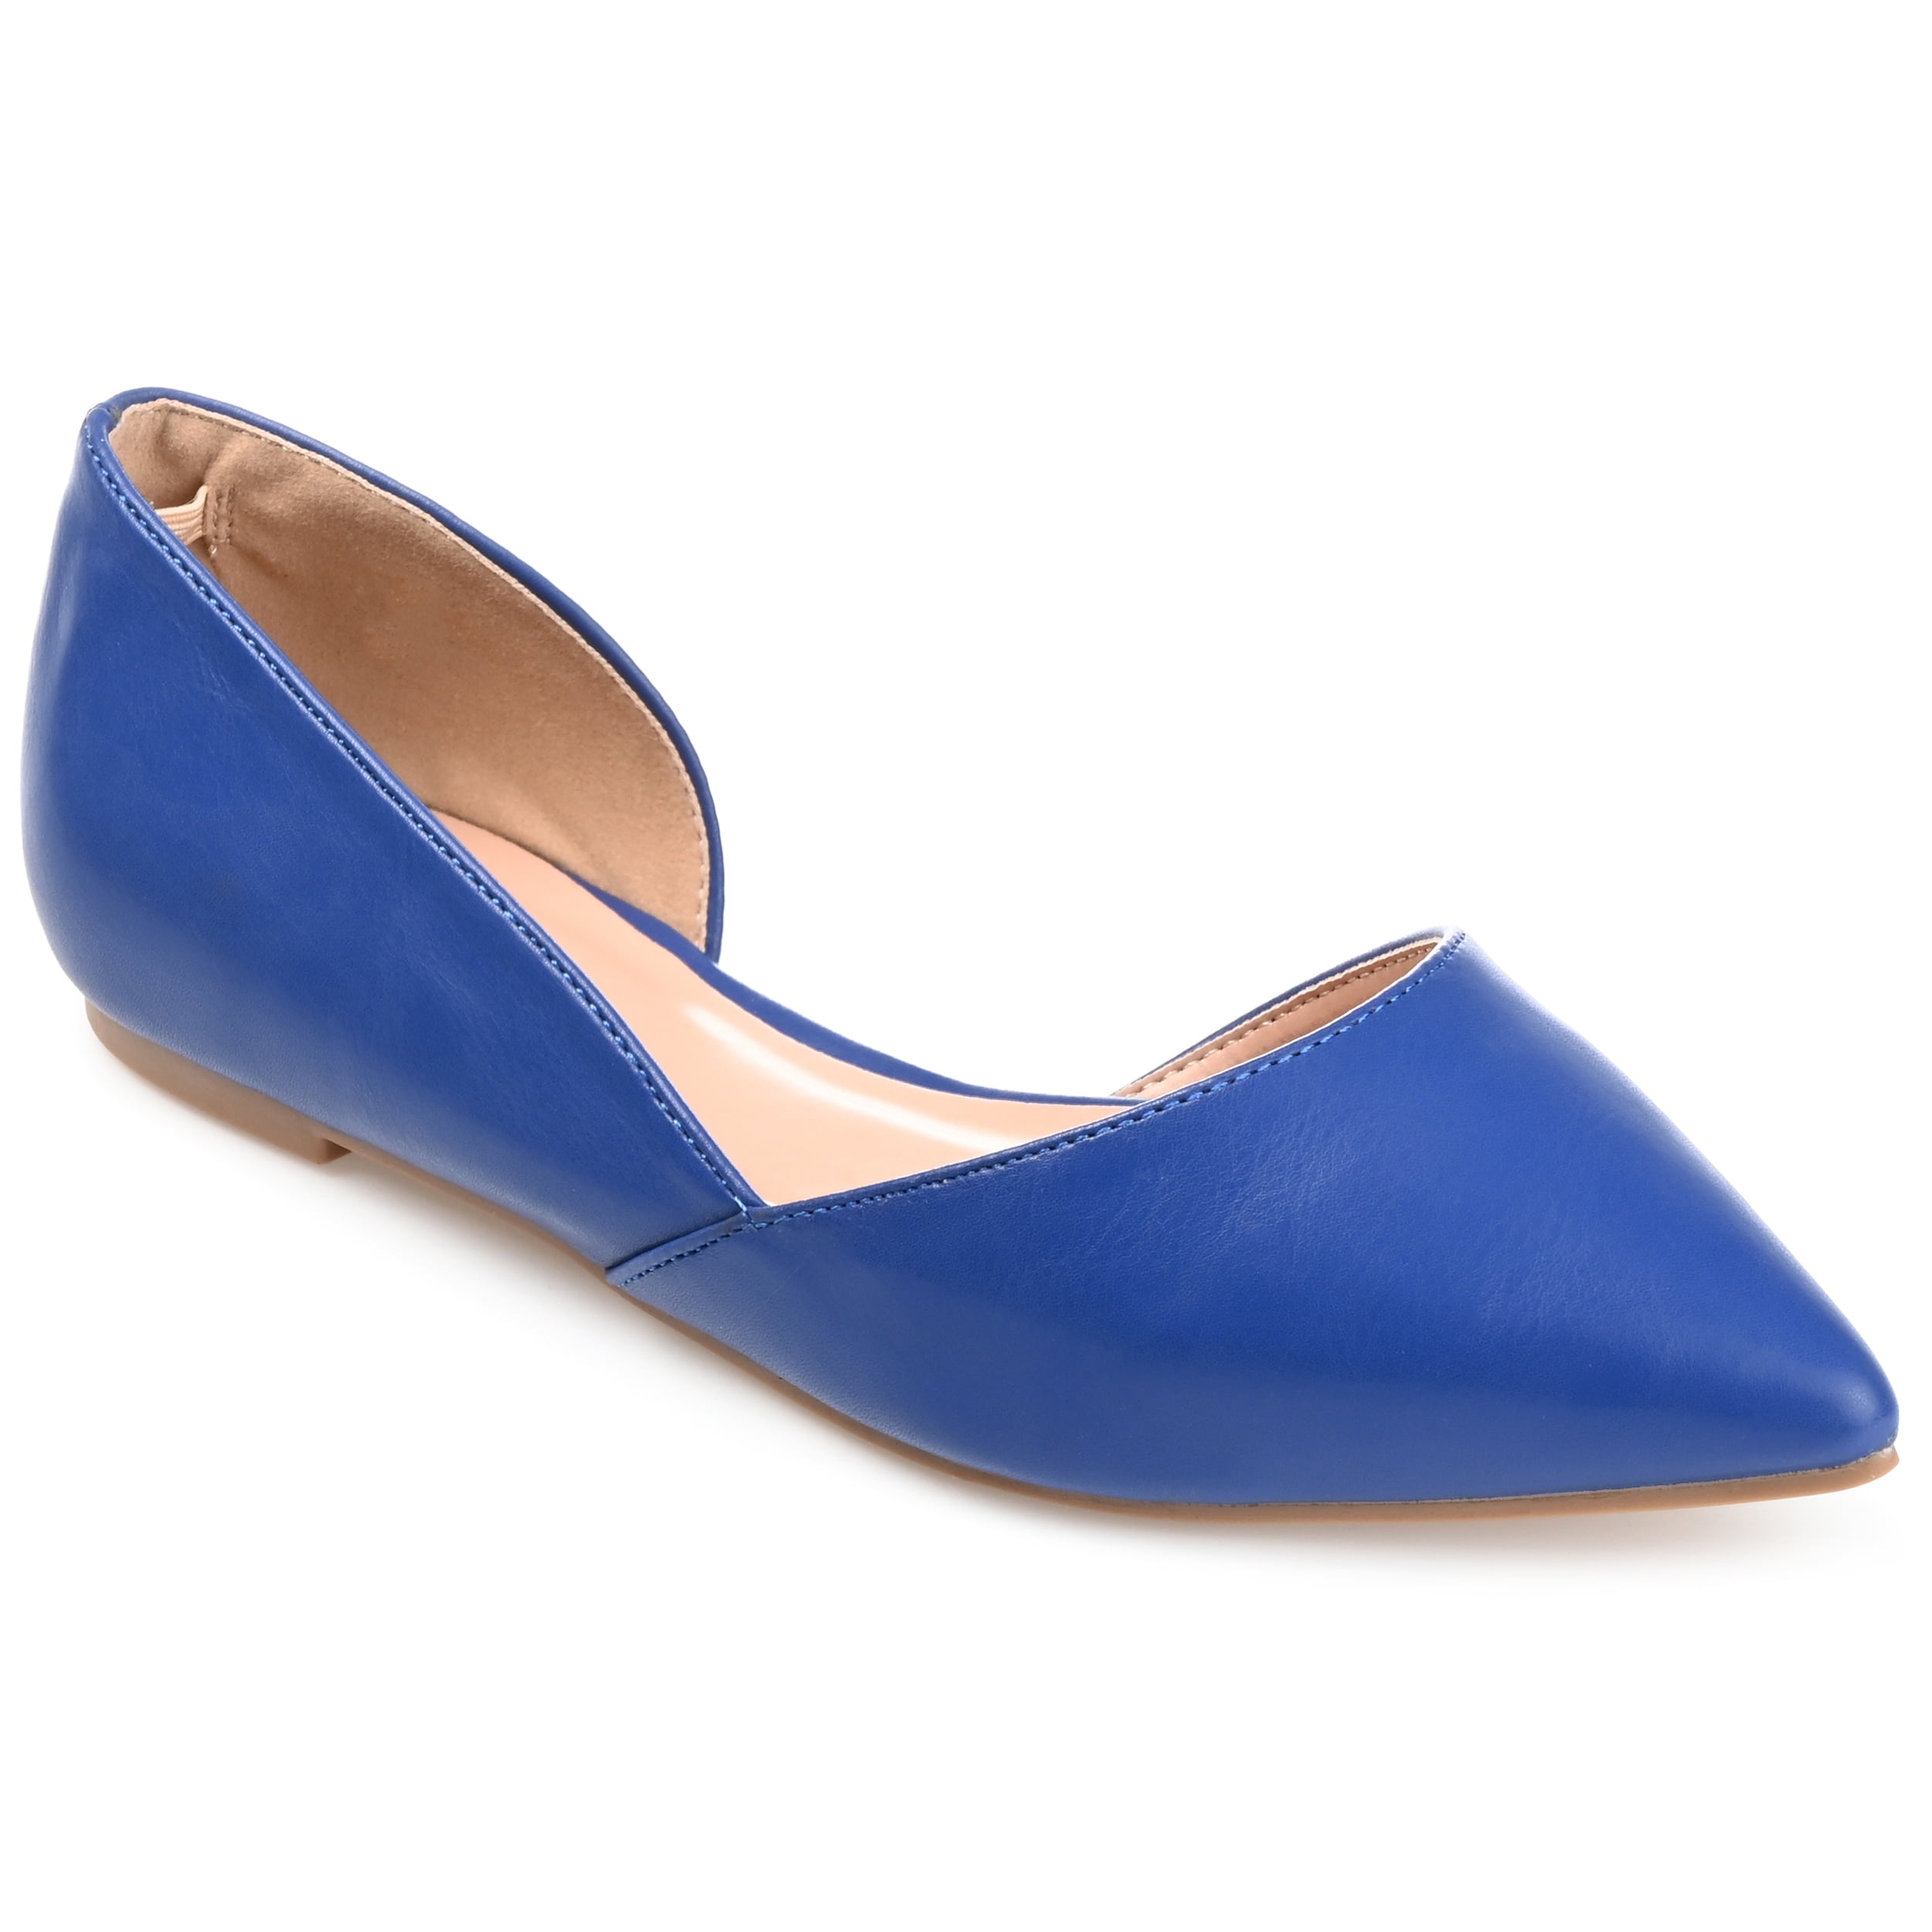 Brinley Co. Women's Wide Width D'Orsay Cut-out Pointed Toe Fashion ...